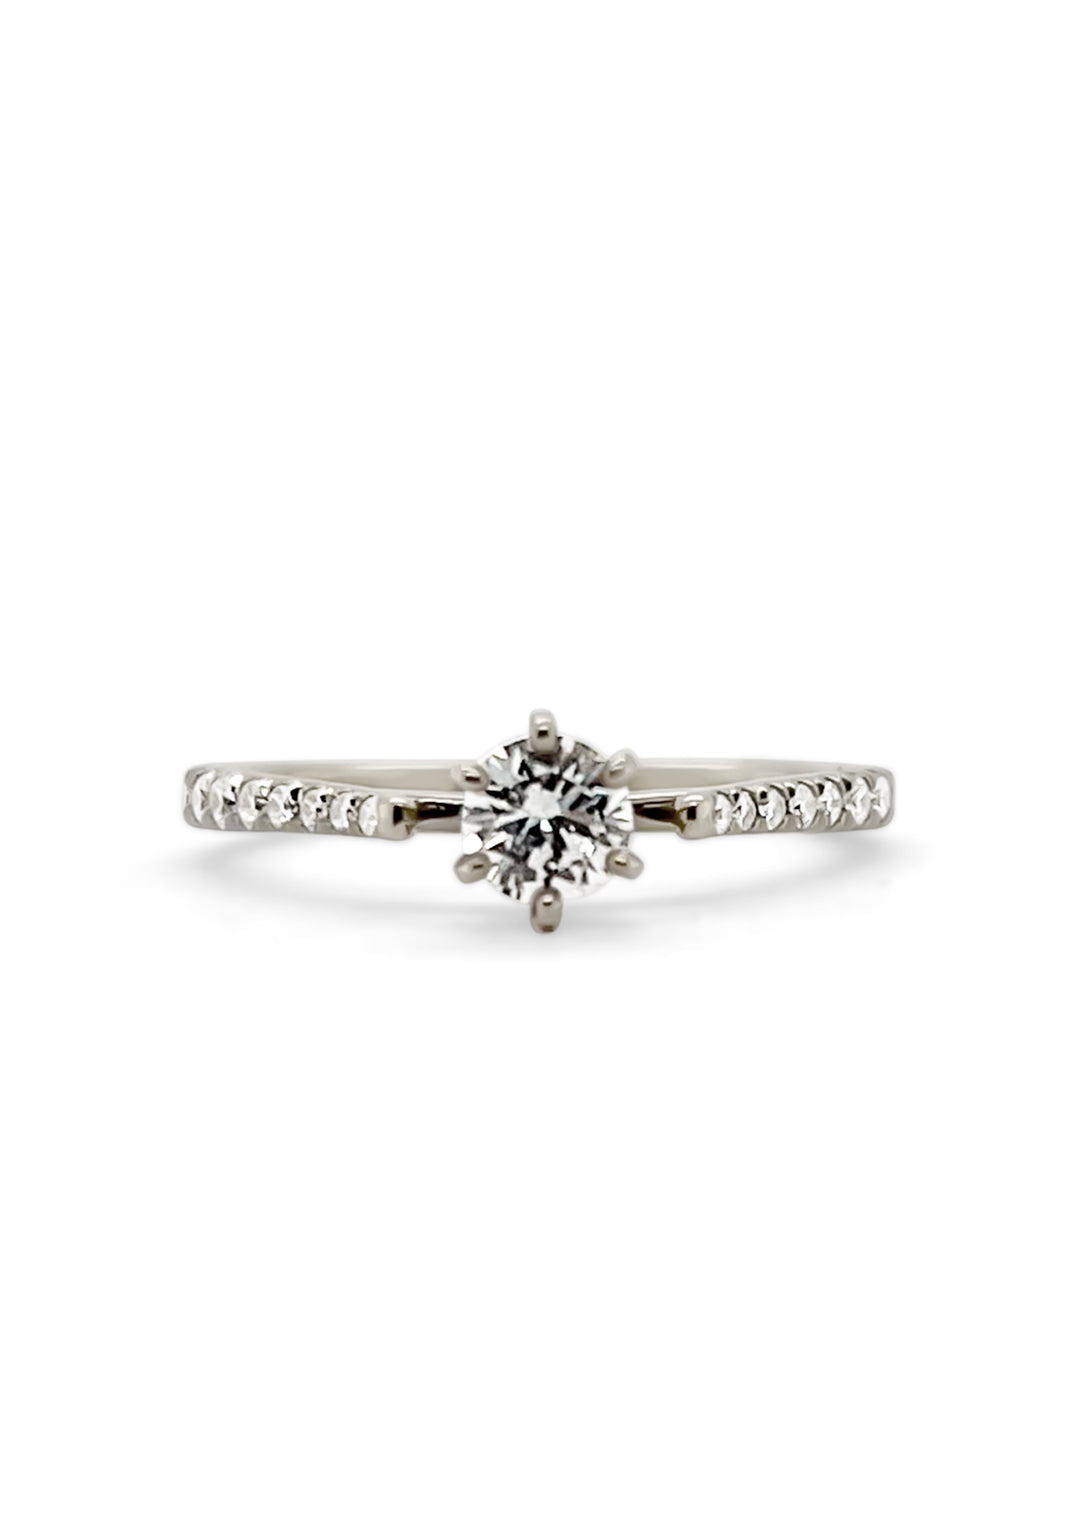 14K White Gold Diamond Accented Engagement Ring